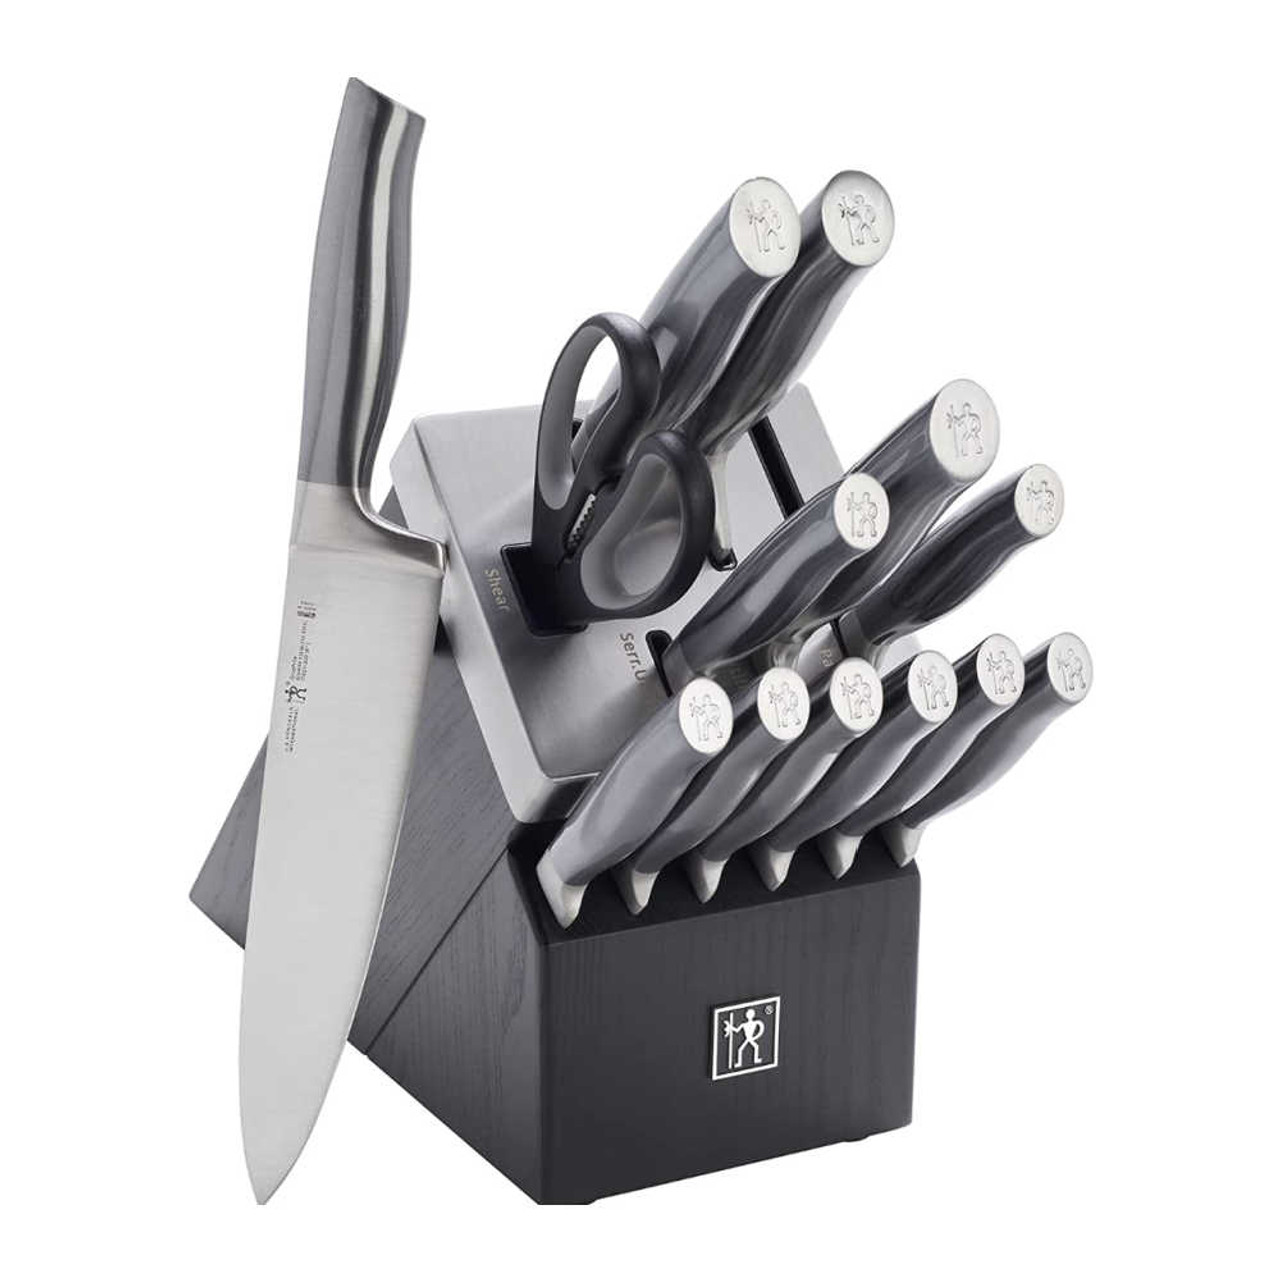 https://cdn11.bigcommerce.com/s-hccytny0od/images/stencil/1280x1280/products/5183/22380/Henckels_Graphite_14-Piece_Self-Sharpening_Knife_Block_Set_Black__21589.1669148796.jpg?c=2?imbypass=on